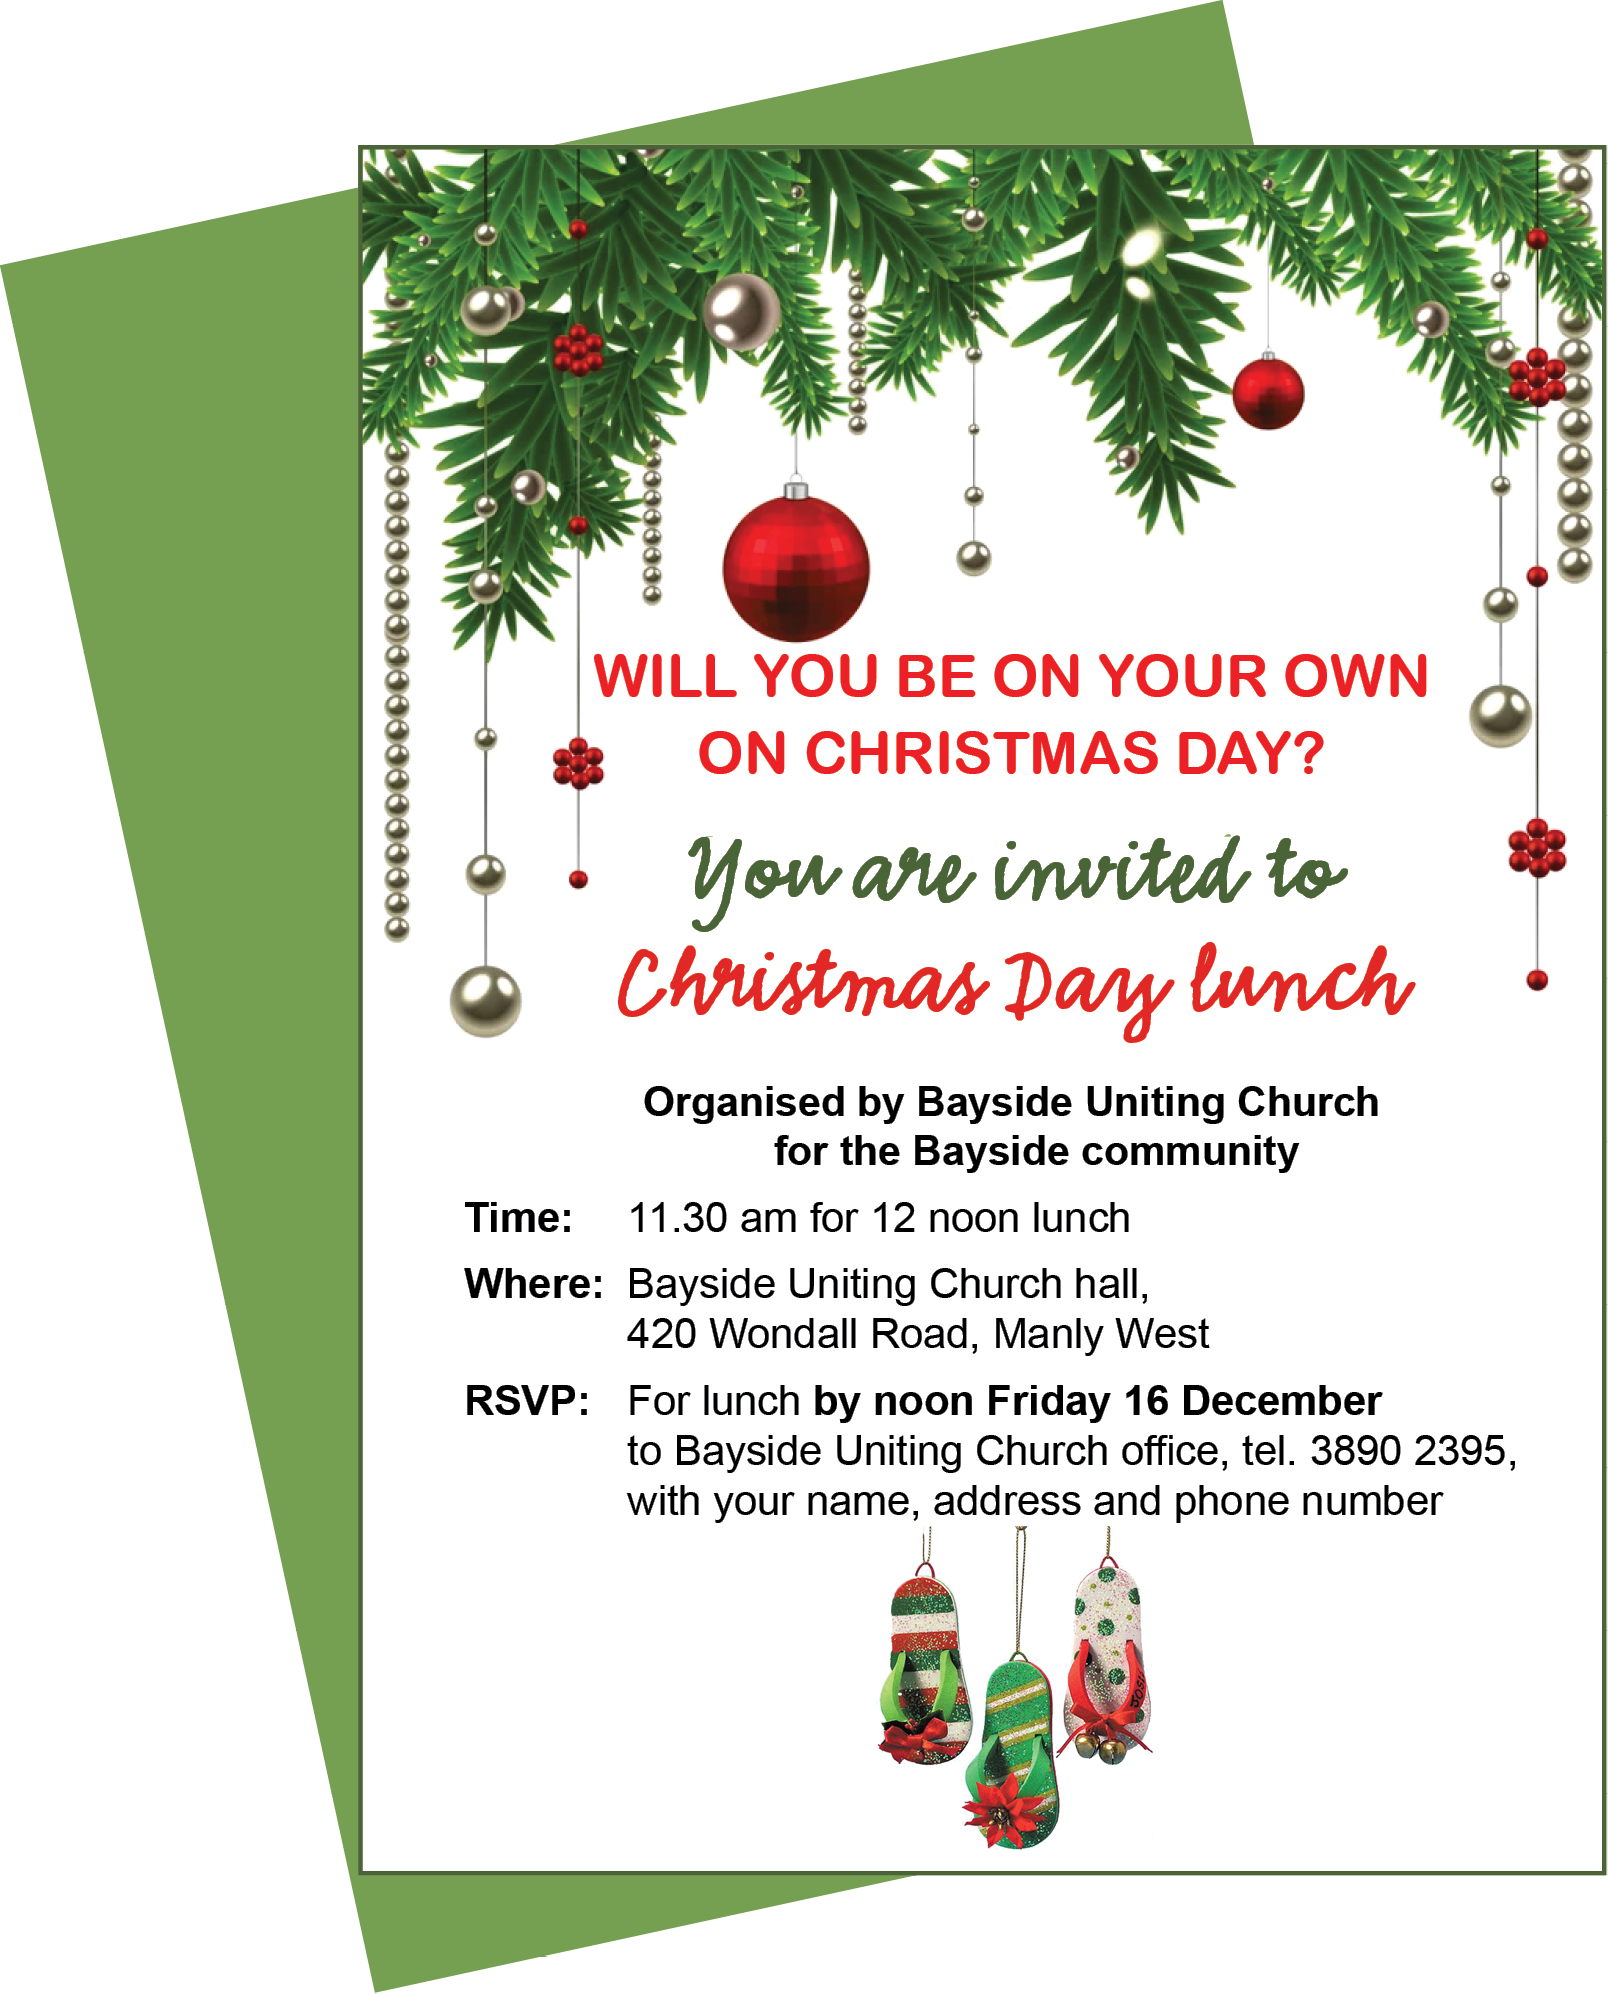 Christmas Day lunch for those on their own (free) The Community